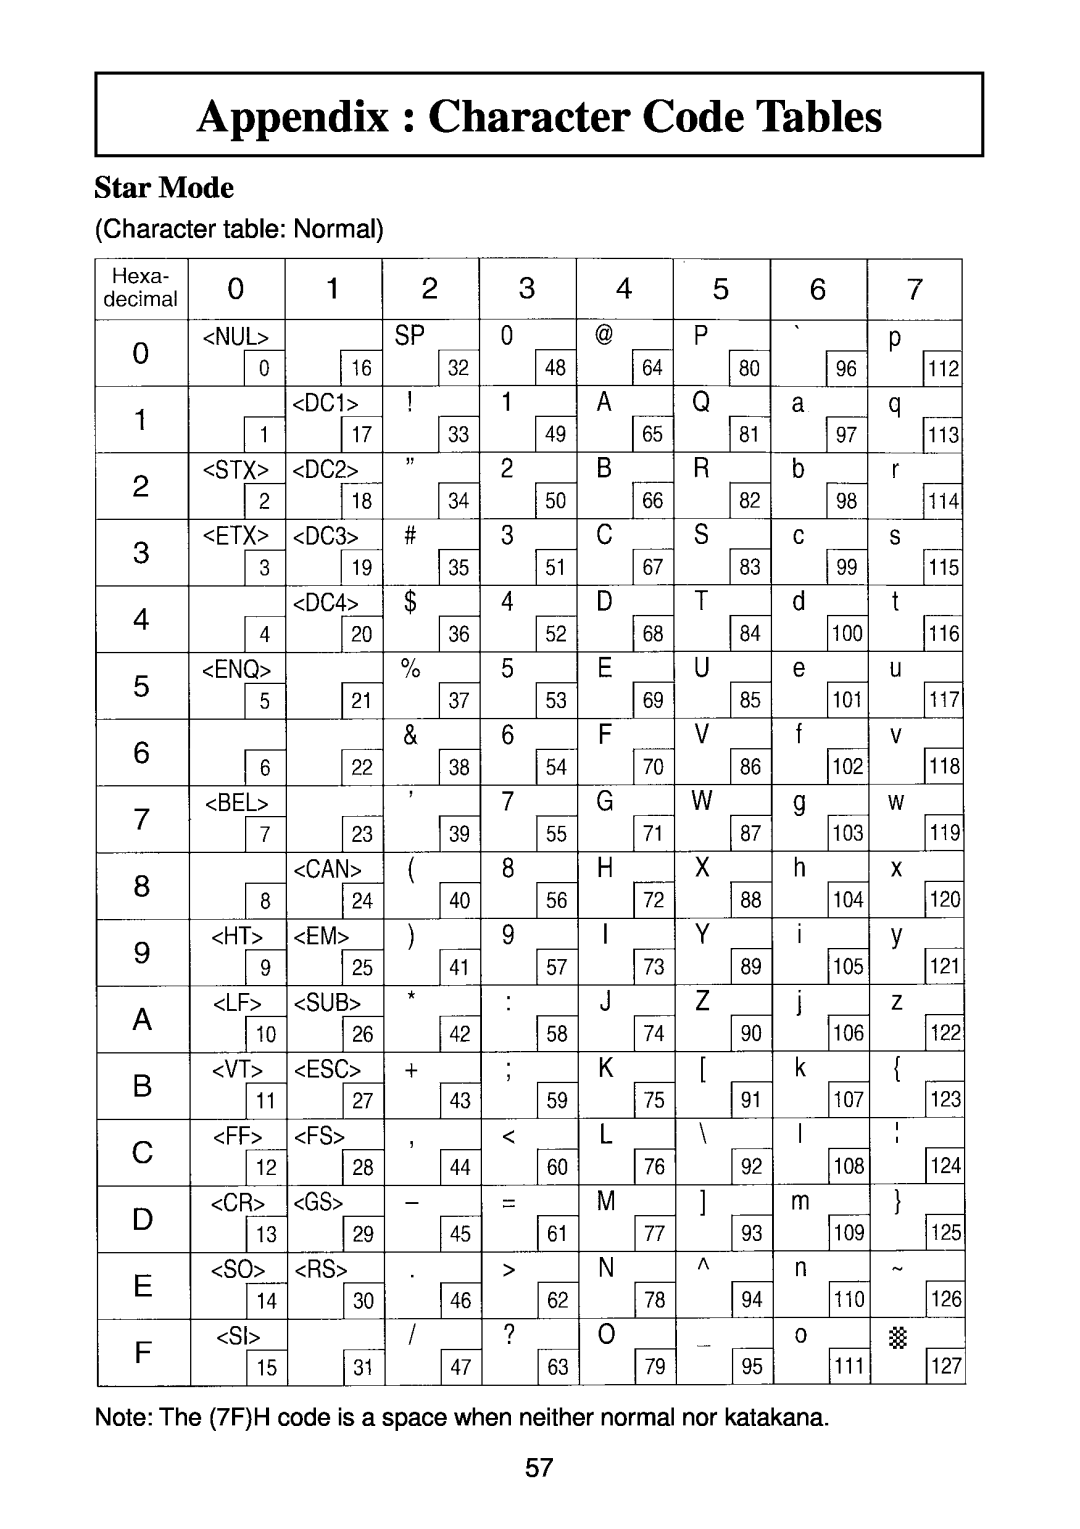 Star Micronics SP2000 manual Appendix Character Code Tables, Star Mode, Character table Normal 